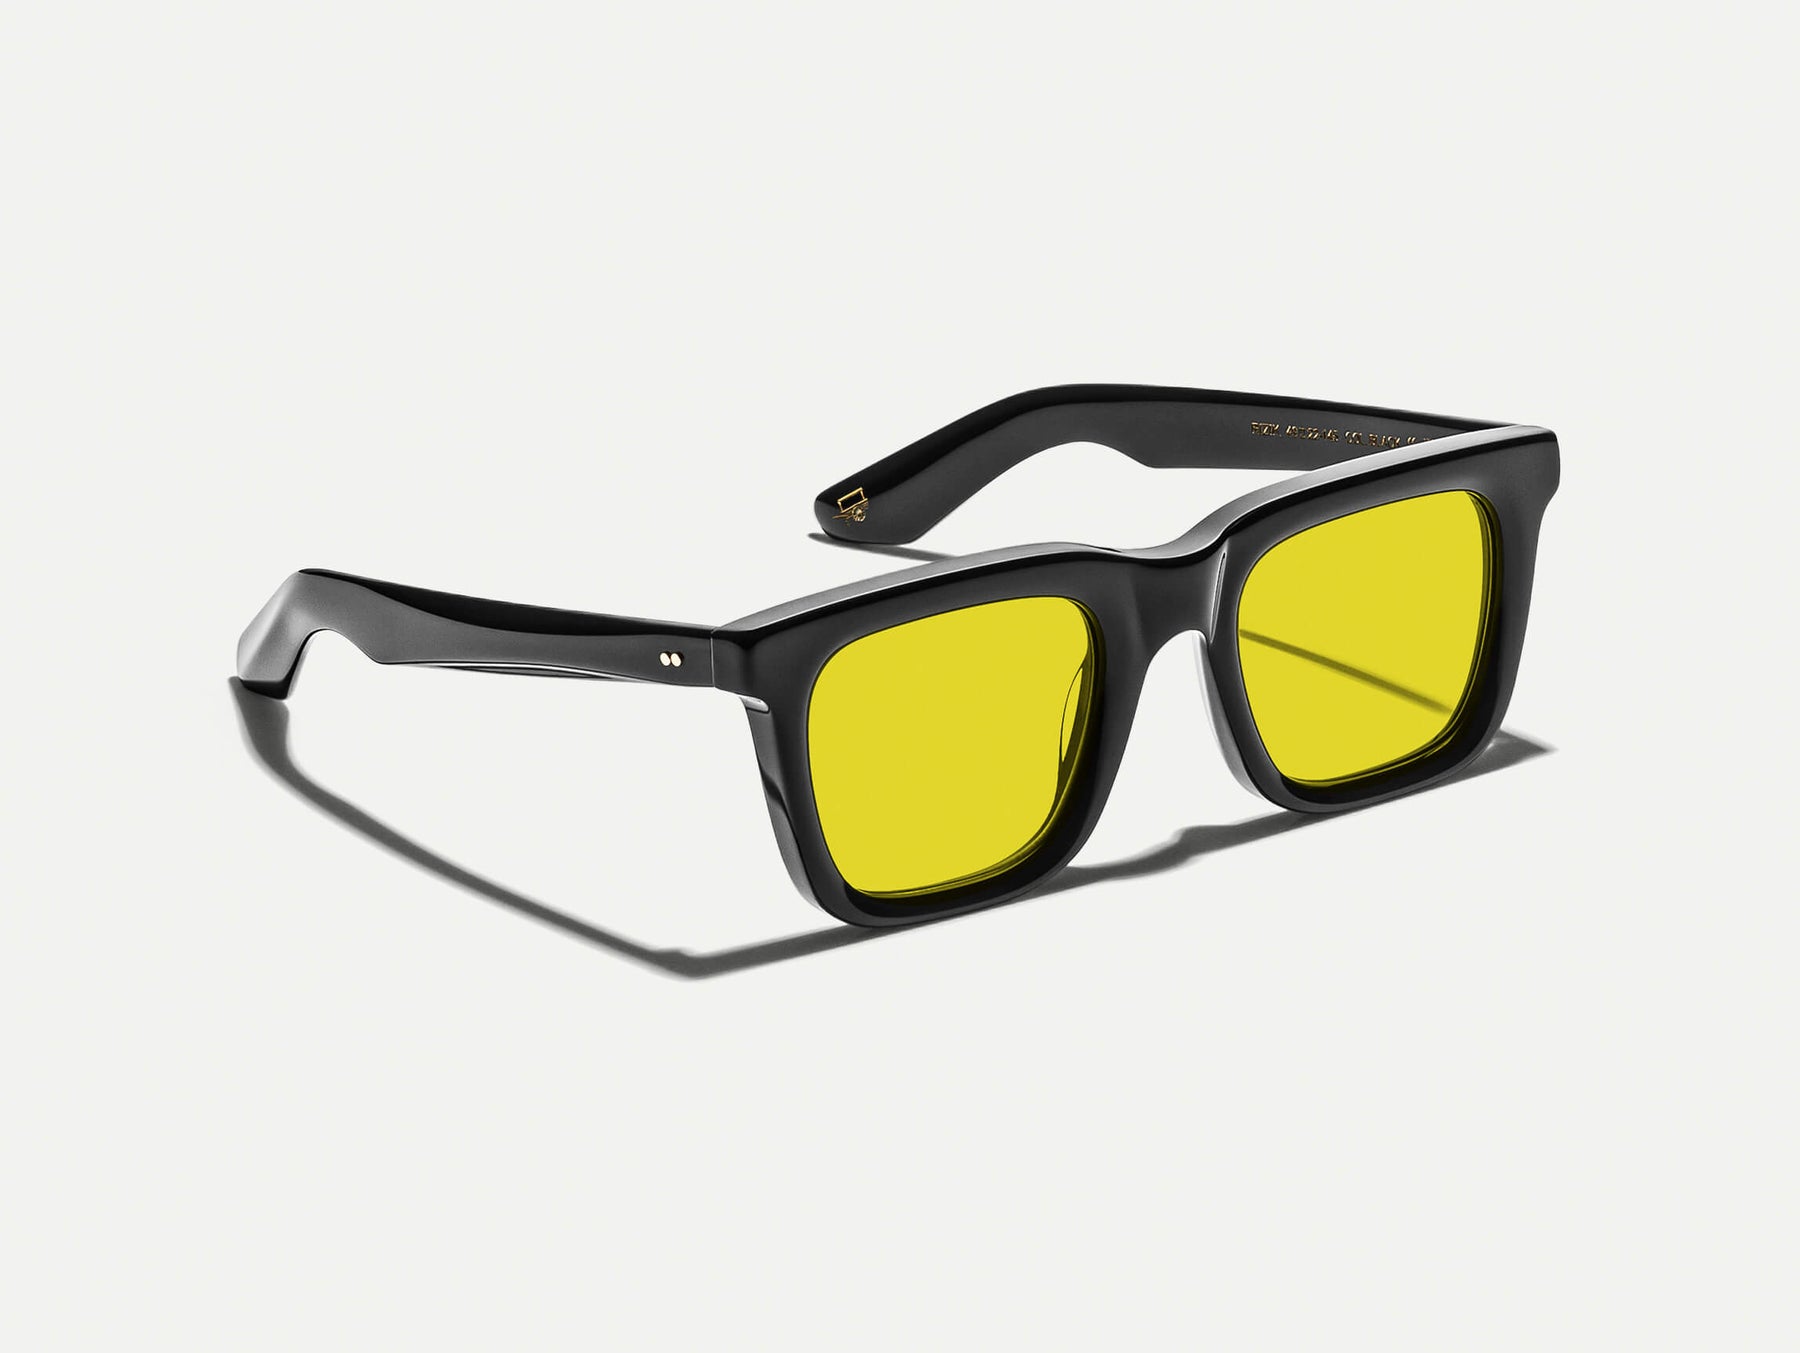 The RIZIK Black with Mellow Yellow Tinted Lenses